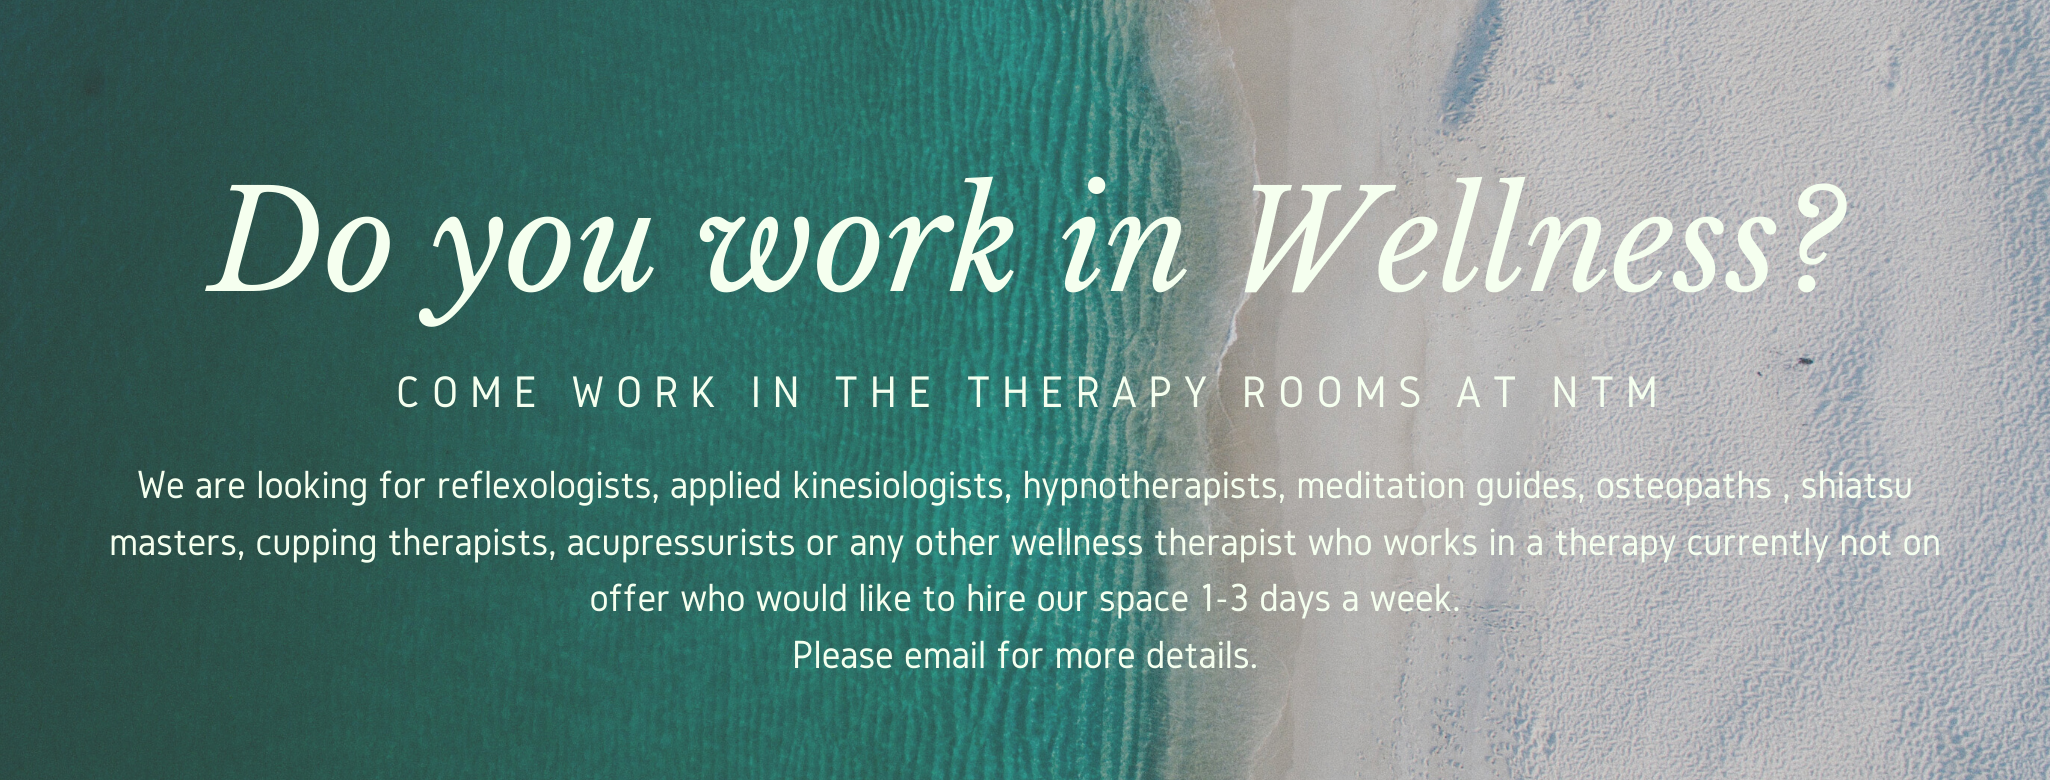 We are looking for reflexologists, applied kinesiologists, hypnotherapists, meditation guides, osteopaths , shiatsu masters, cupping therapists, acupressurists or any other wellness therapist who works in a therapy currently not on offer who would like to hire our space 1-3 days a week. Please email for more details.